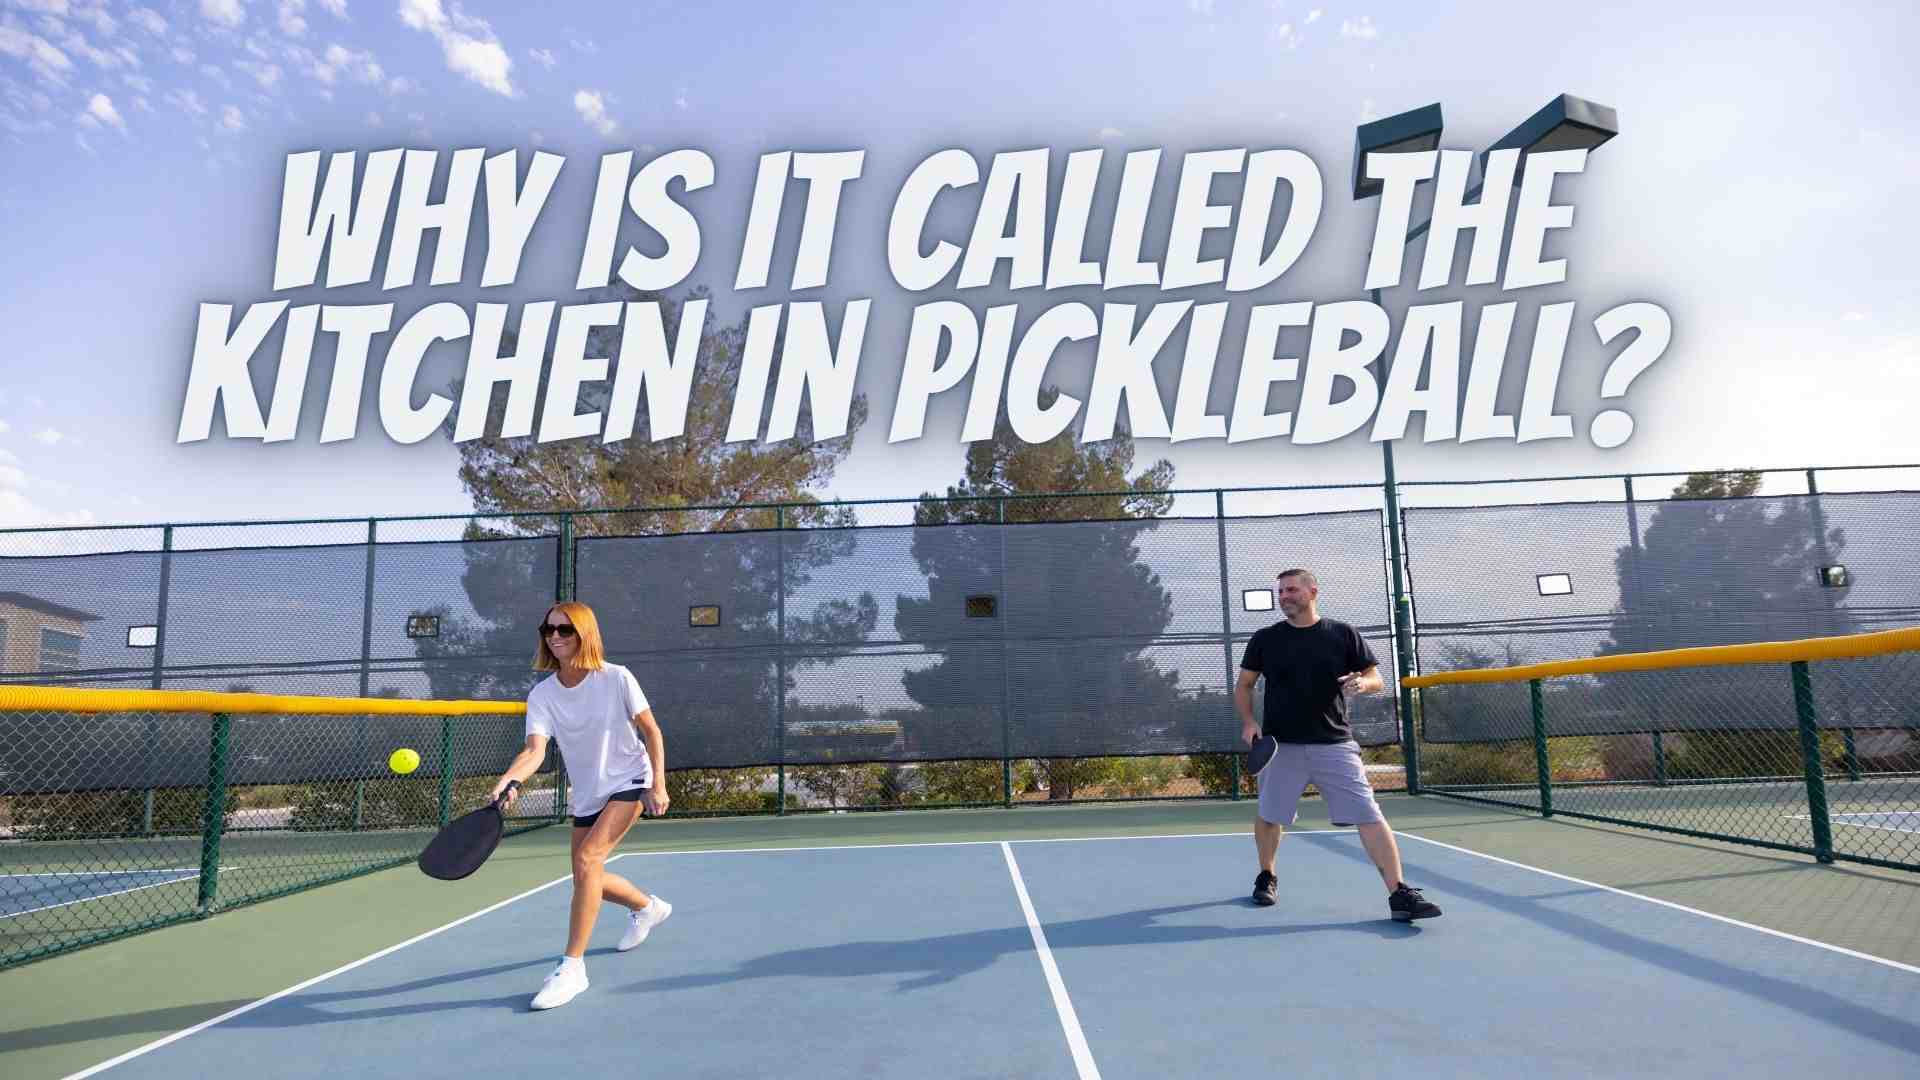 Why Is It Called the Kitchen In Pickleball